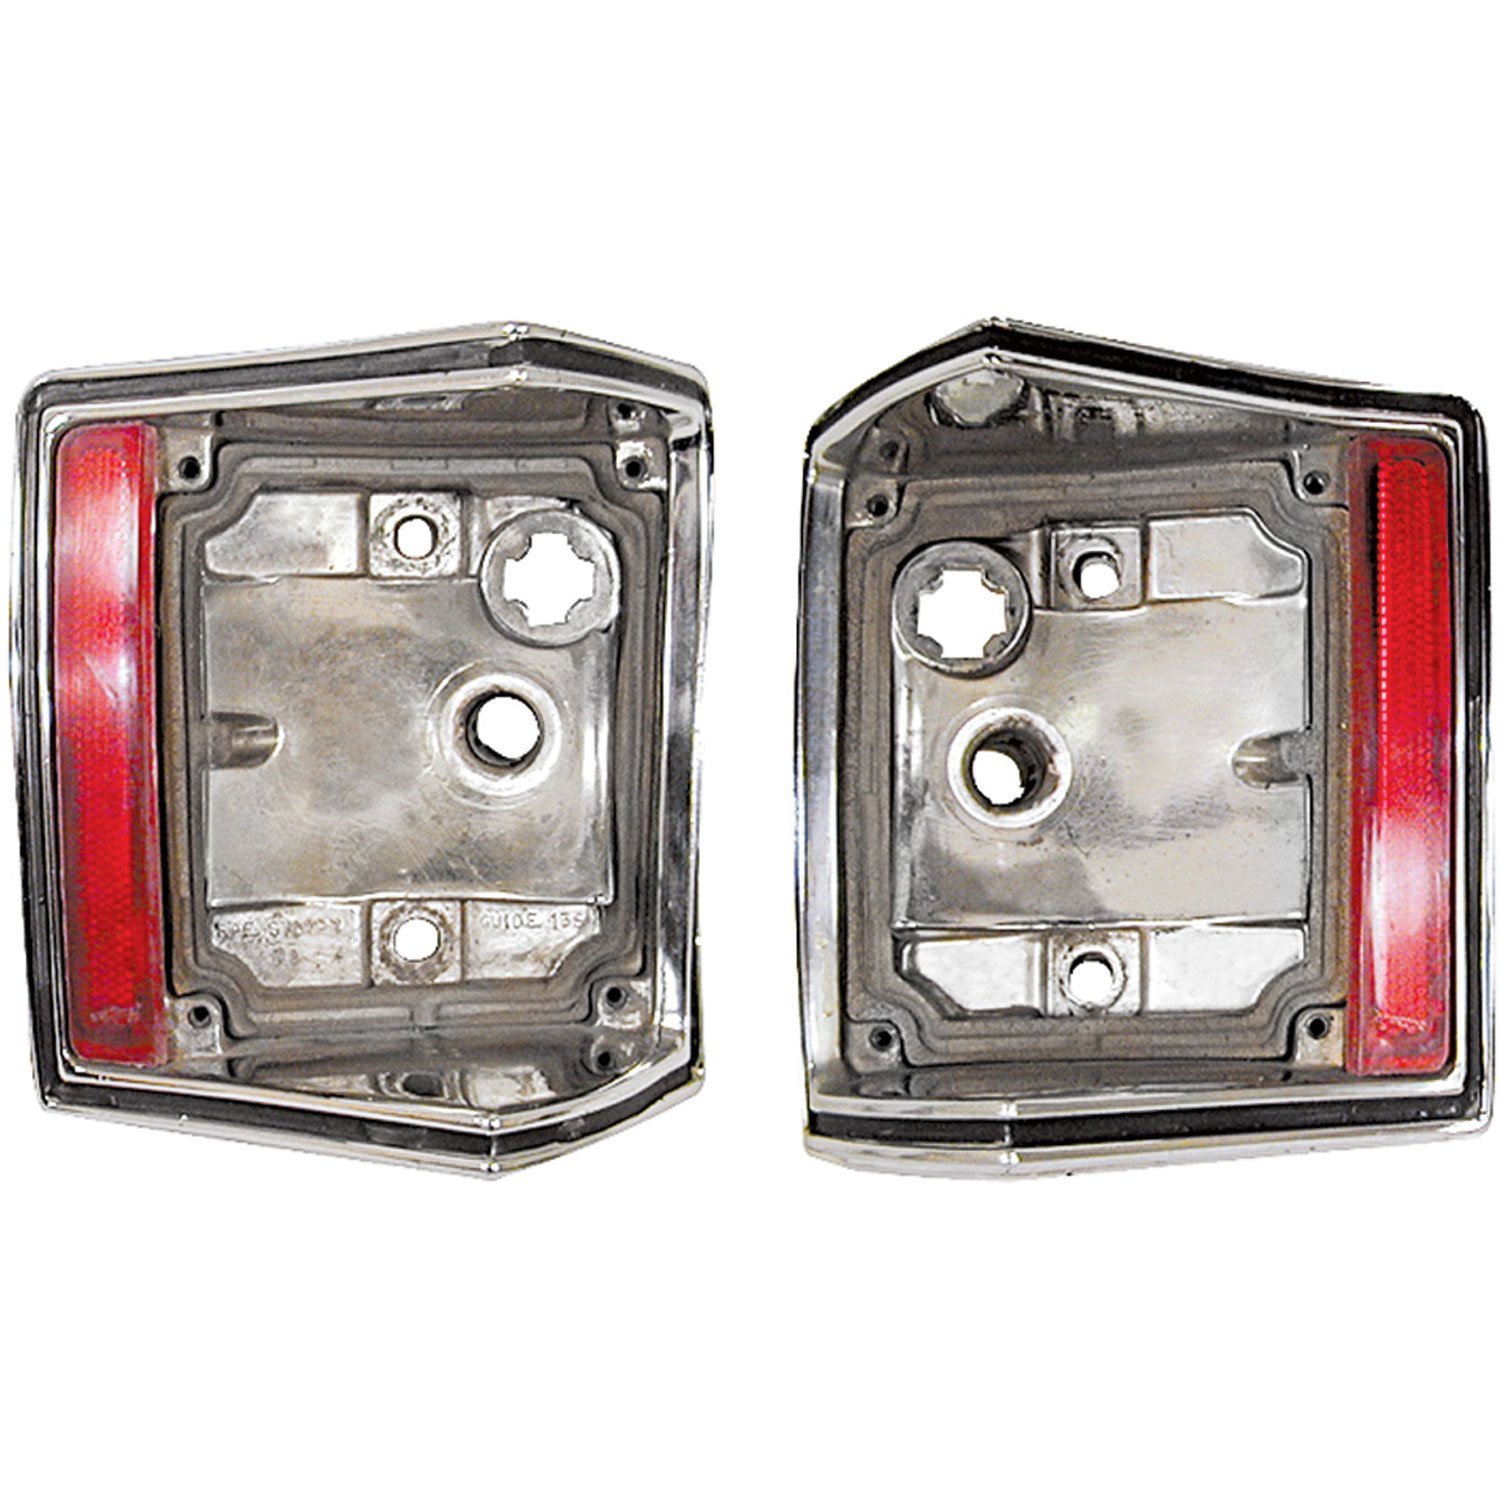 Tail Lamp Housing for 1970-1972 Chevy Chevelle Wagon,